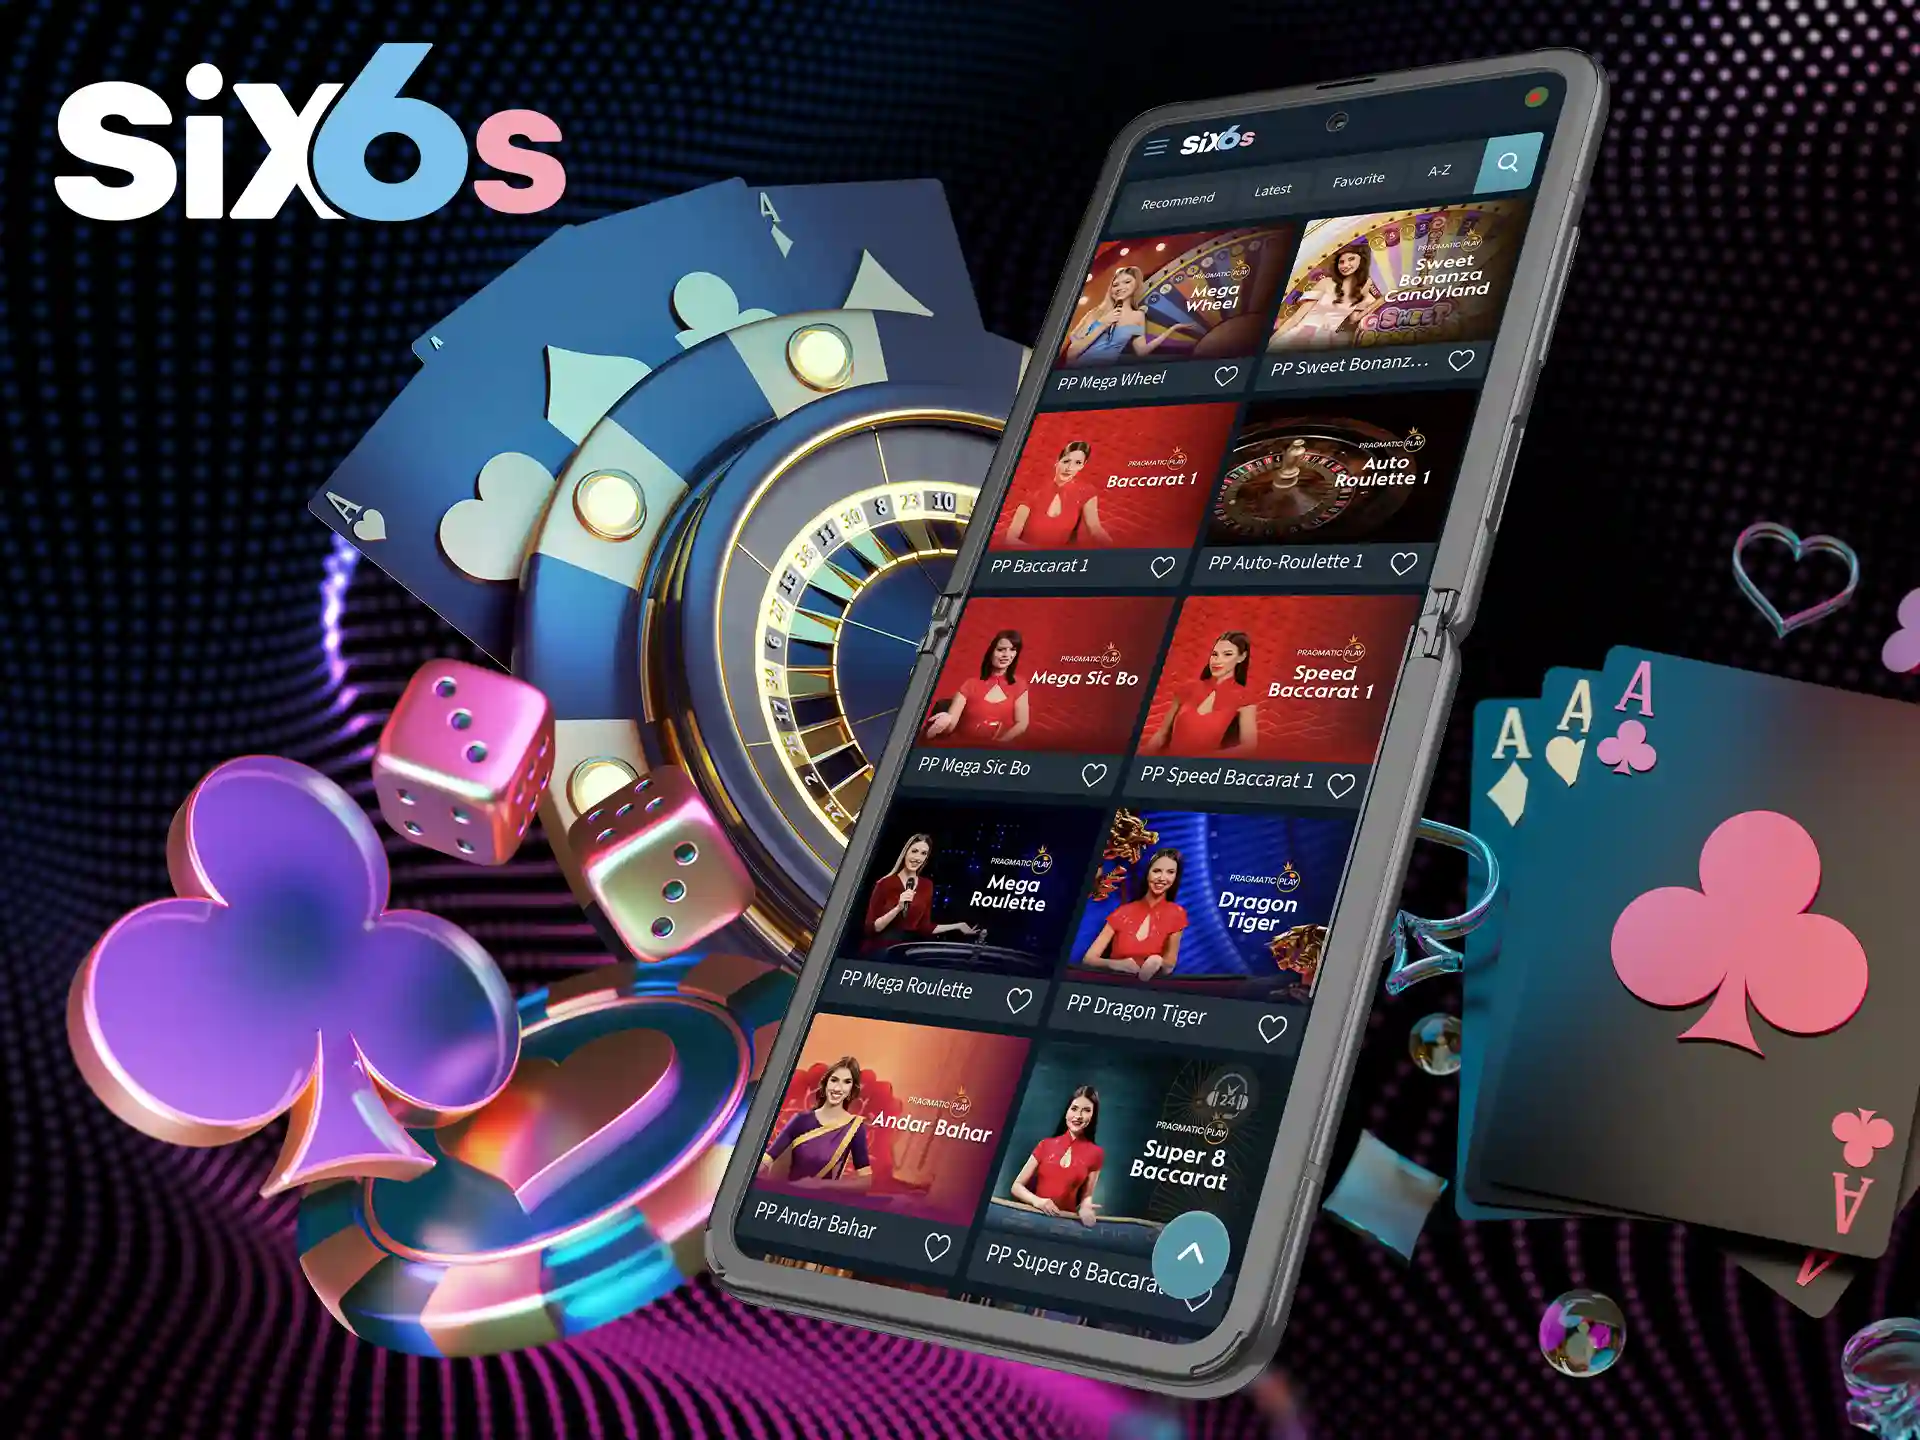 Six6s also has a great online casino with lots of games and entertainment.